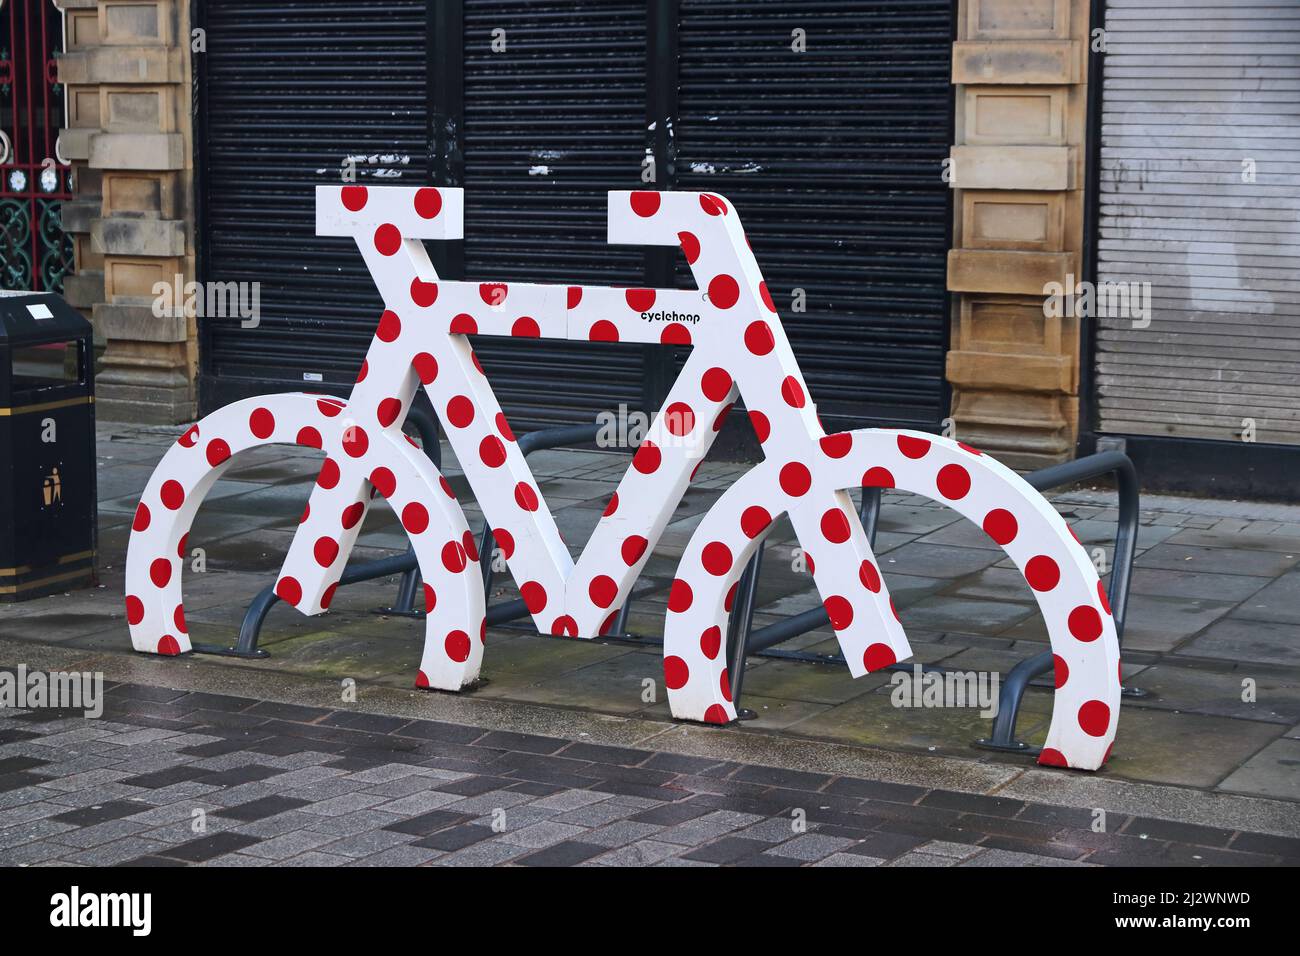 Model of bicycle painted white with red polka dots at bicycle parking frame, Halifax, West Yorkshire Stock Photo